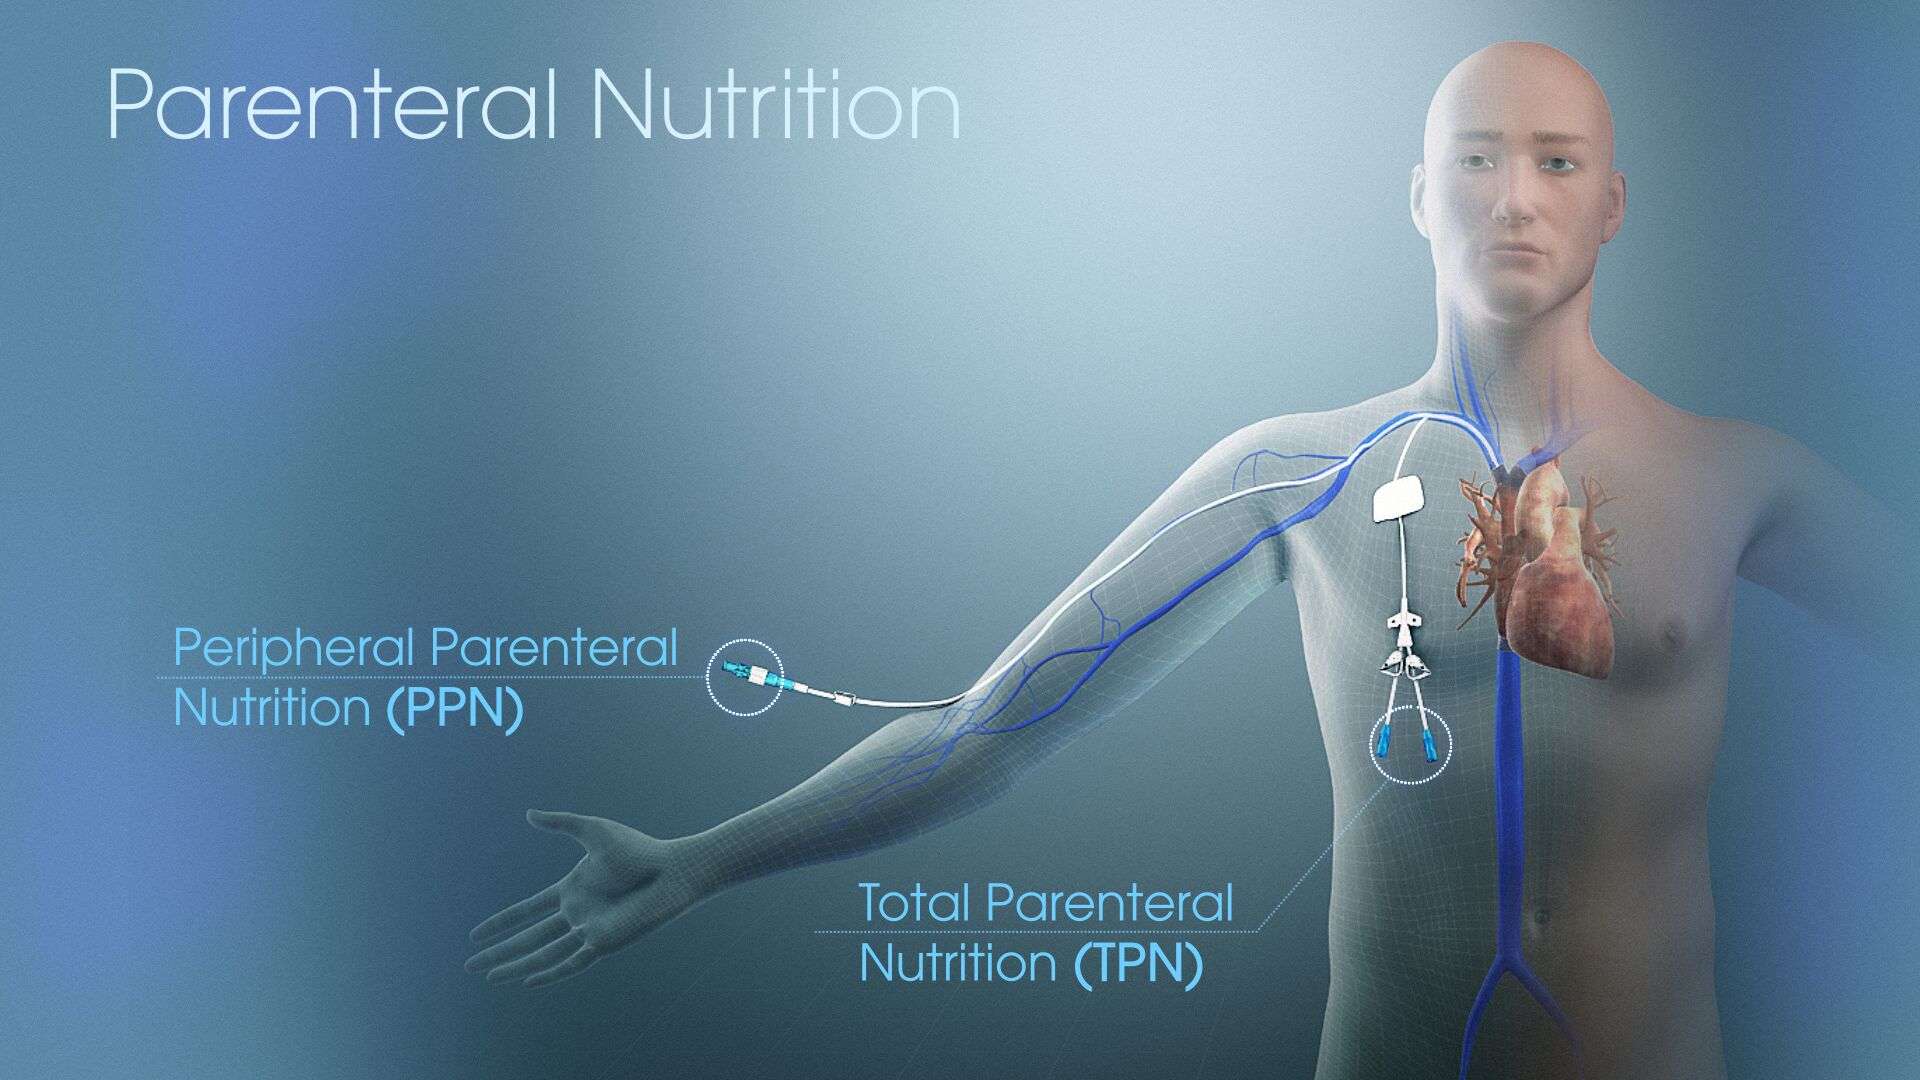 Parenteral Nutrition Market Trends, Share and Future Growth 2030